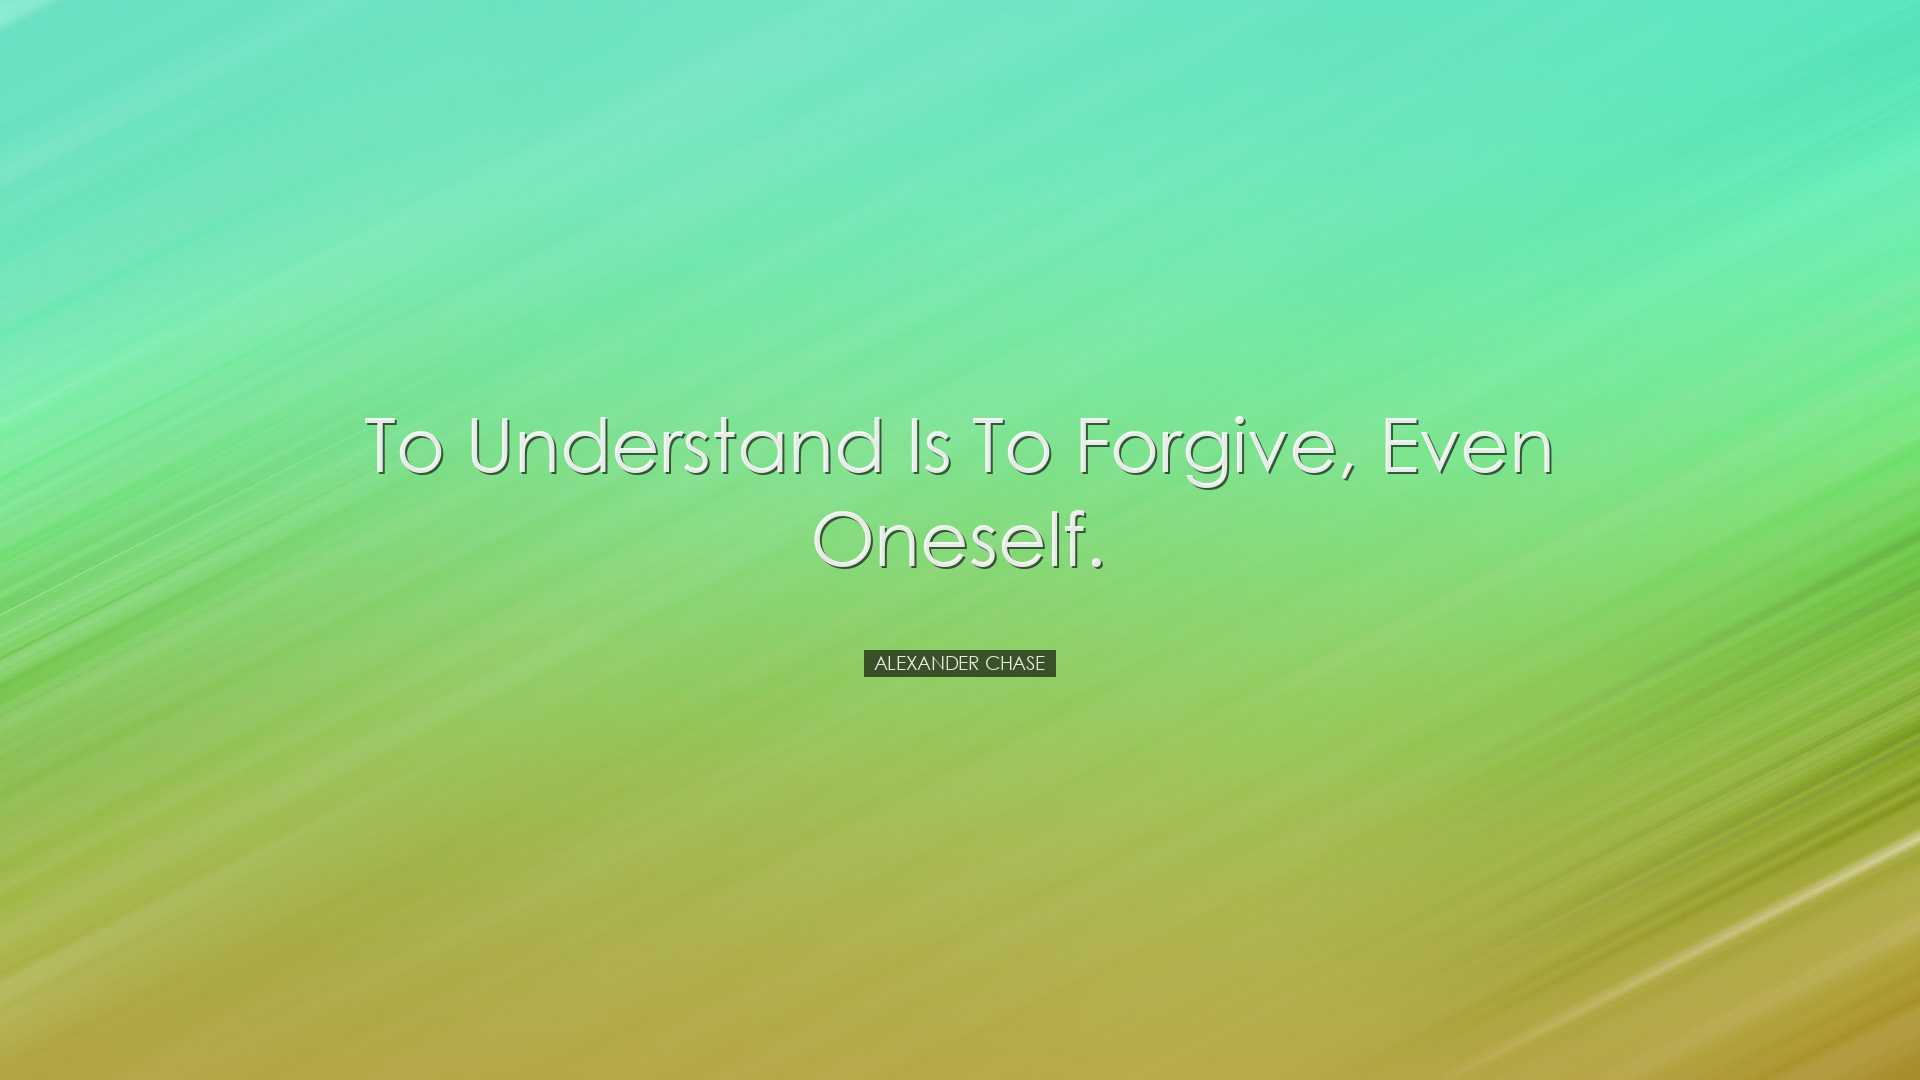 To understand is to forgive, even oneself. - Alexander Chase